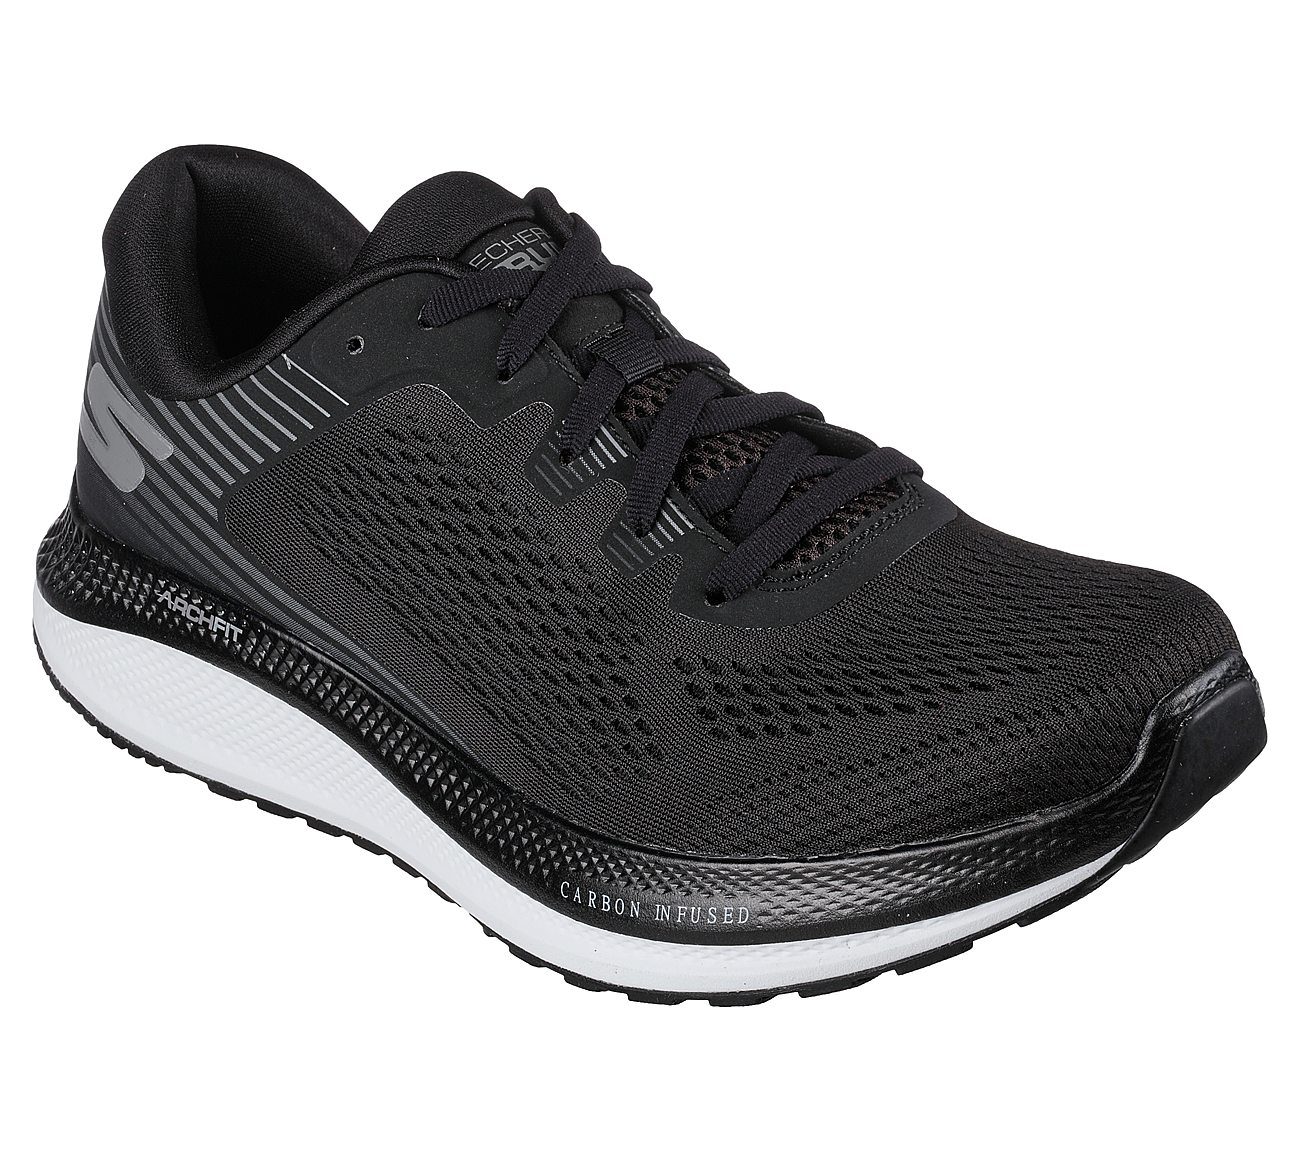 GO RUN PERSISTENCE, BLACK/WHITE Footwear Lateral View